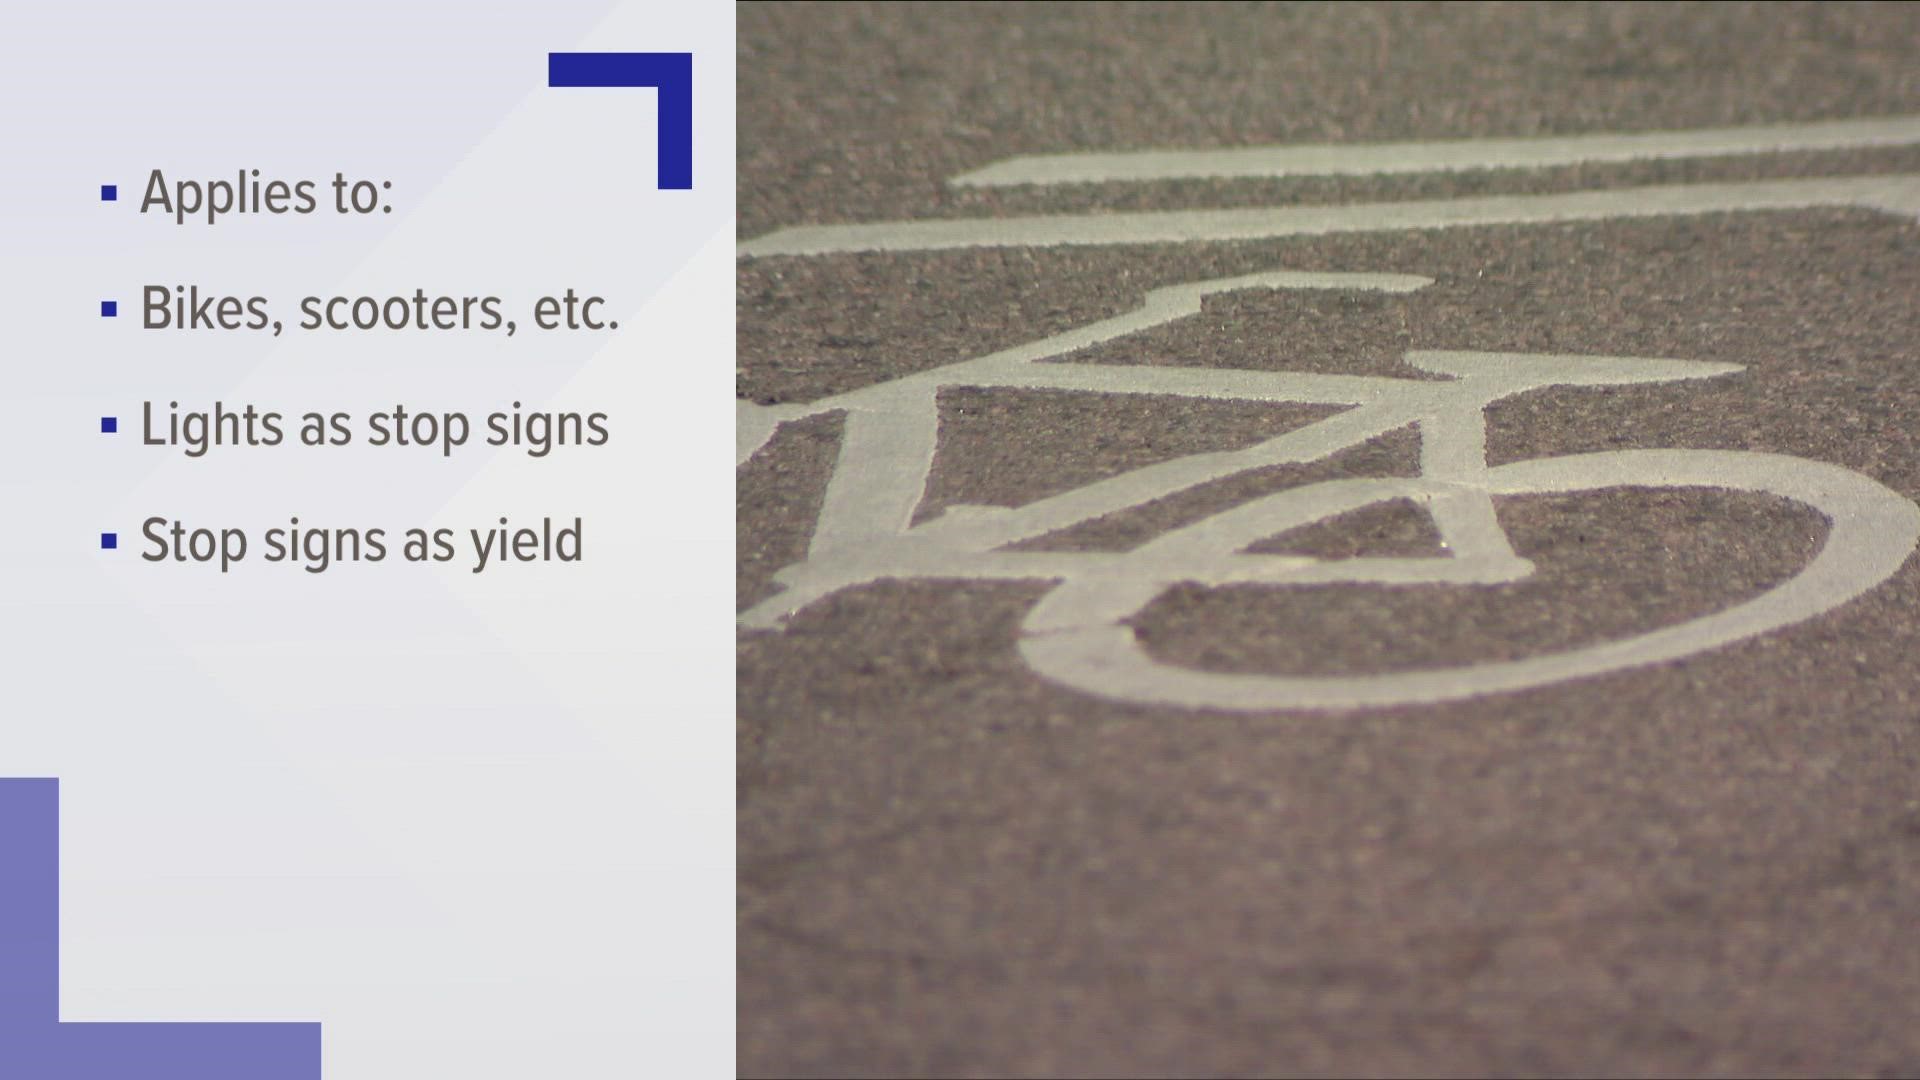 Gov. Jared Polis on Wednesday signed a bill that allows cyclists to treat stop signs as yield signs when they have right-of-way.